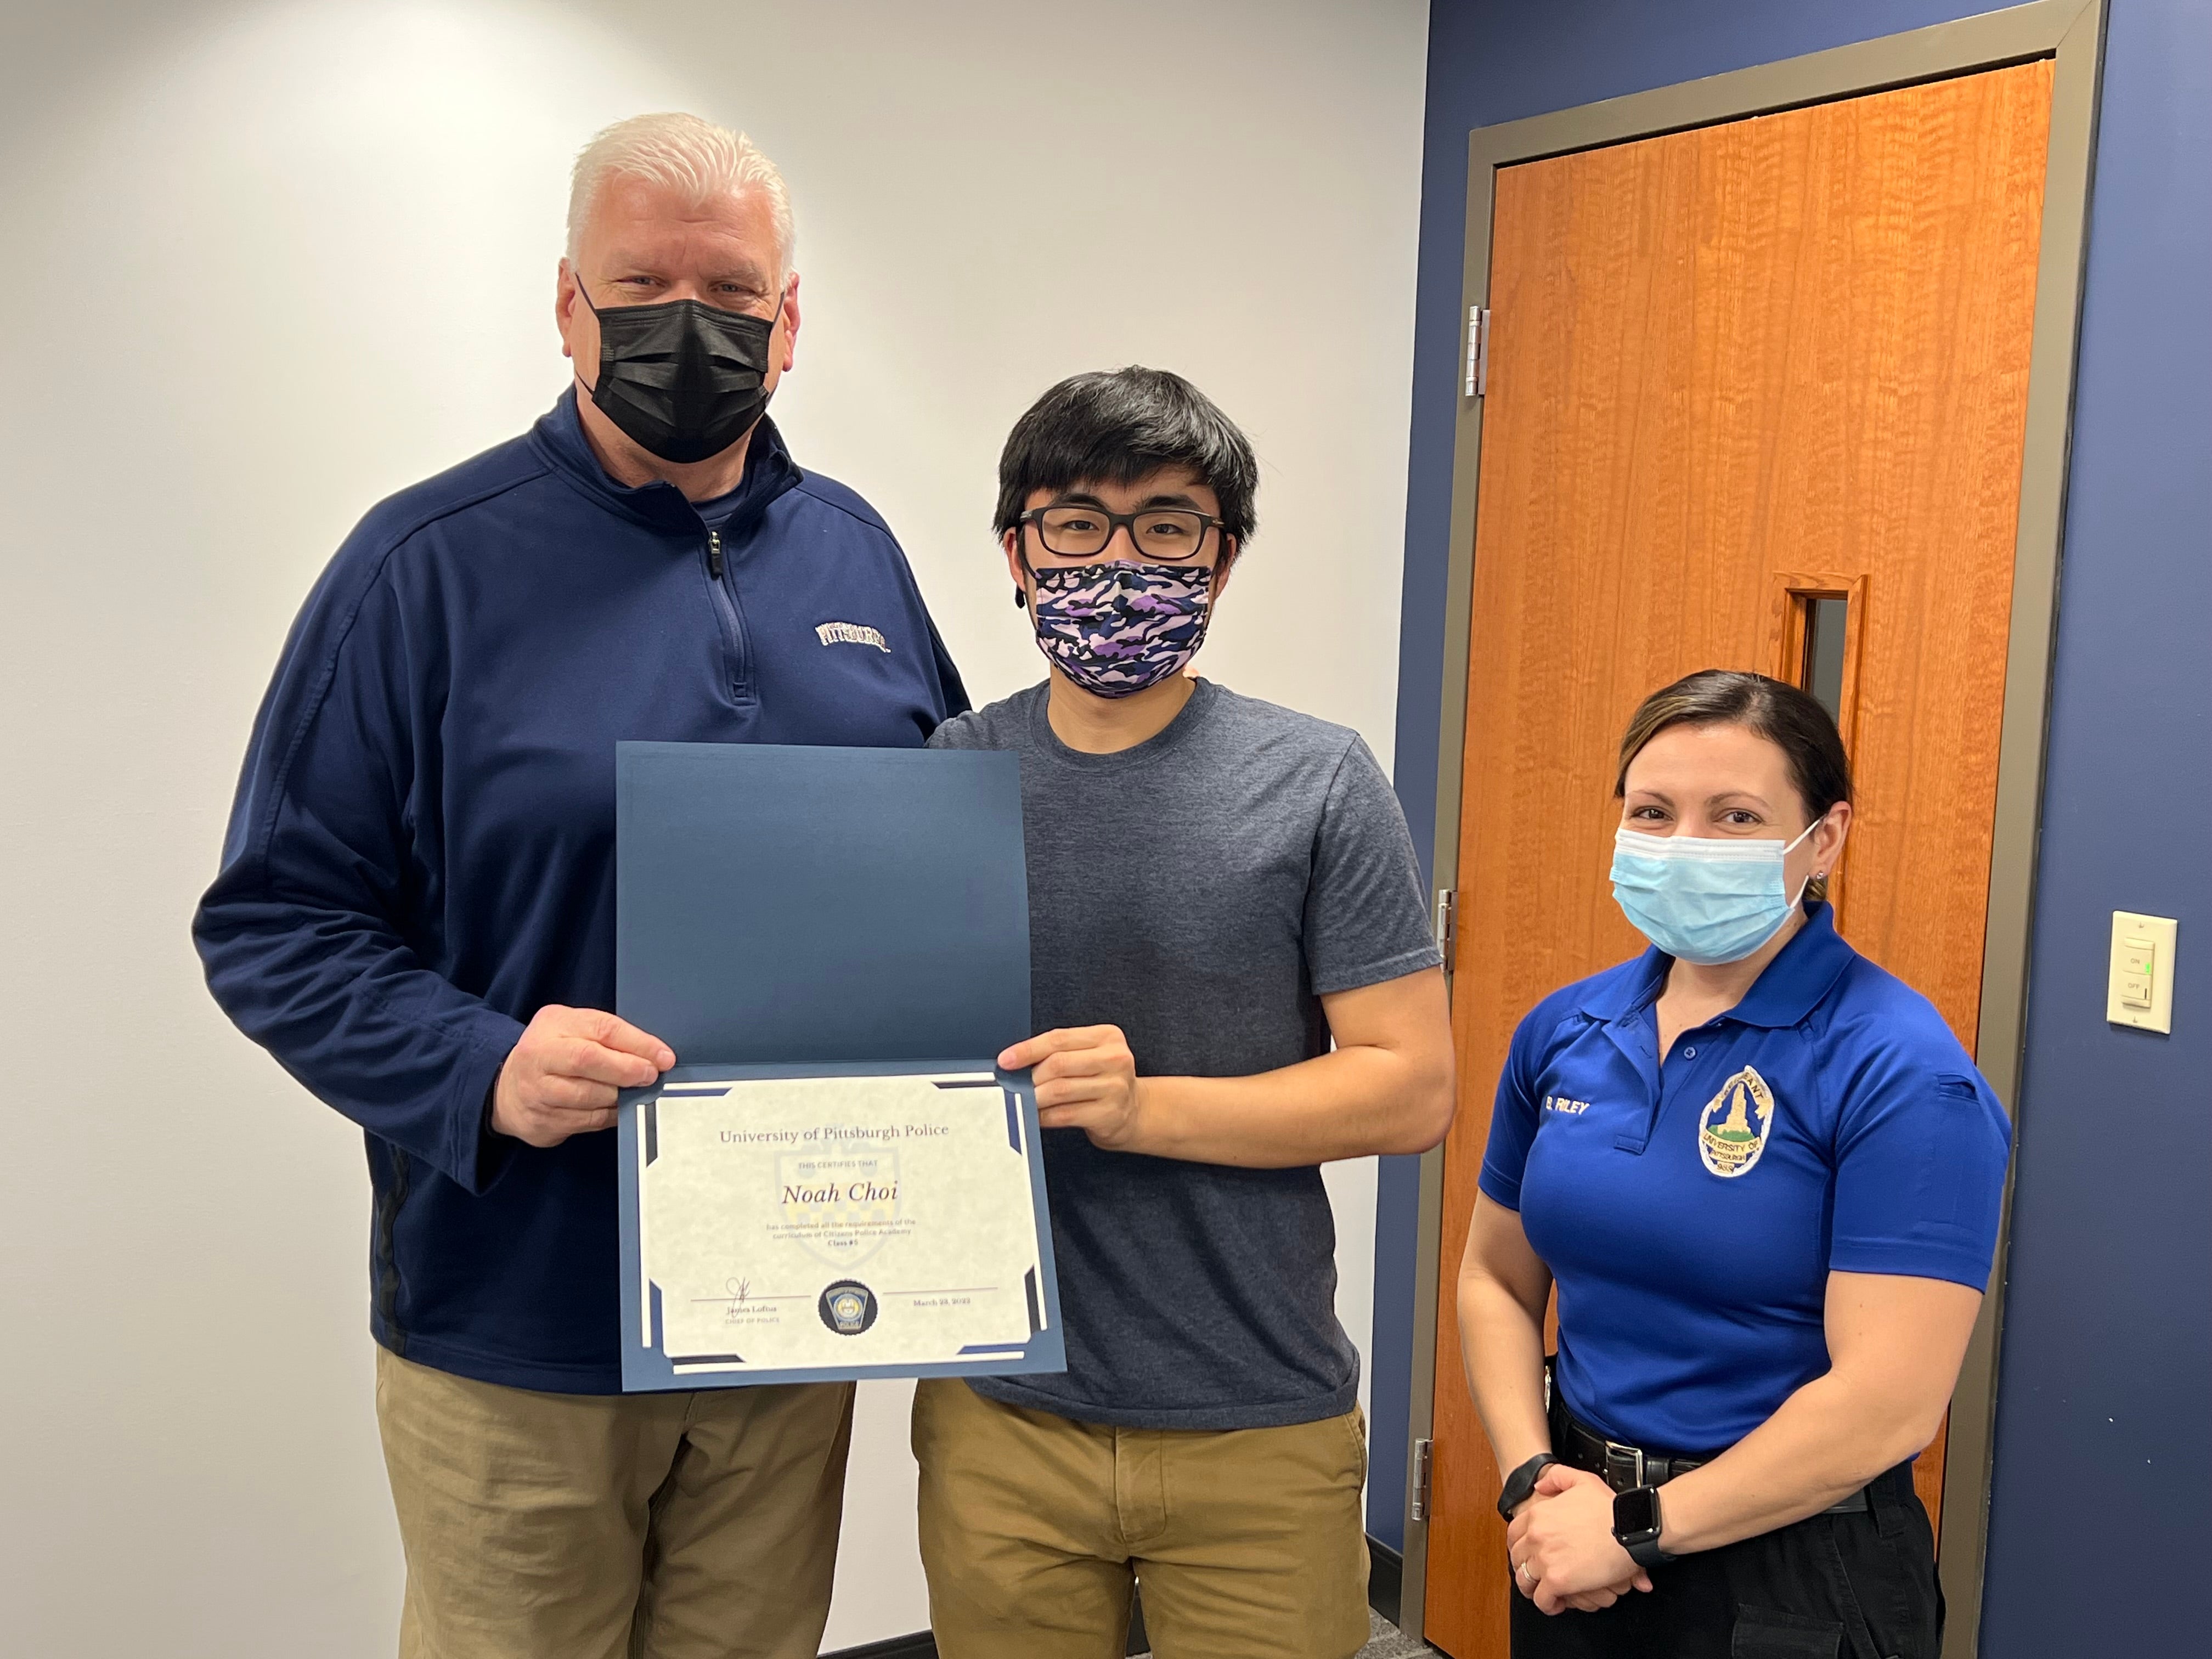 Noah Choi receives his graduation certificate from Pitt Police Chief James Loftus and Lt. Brooke Riley.